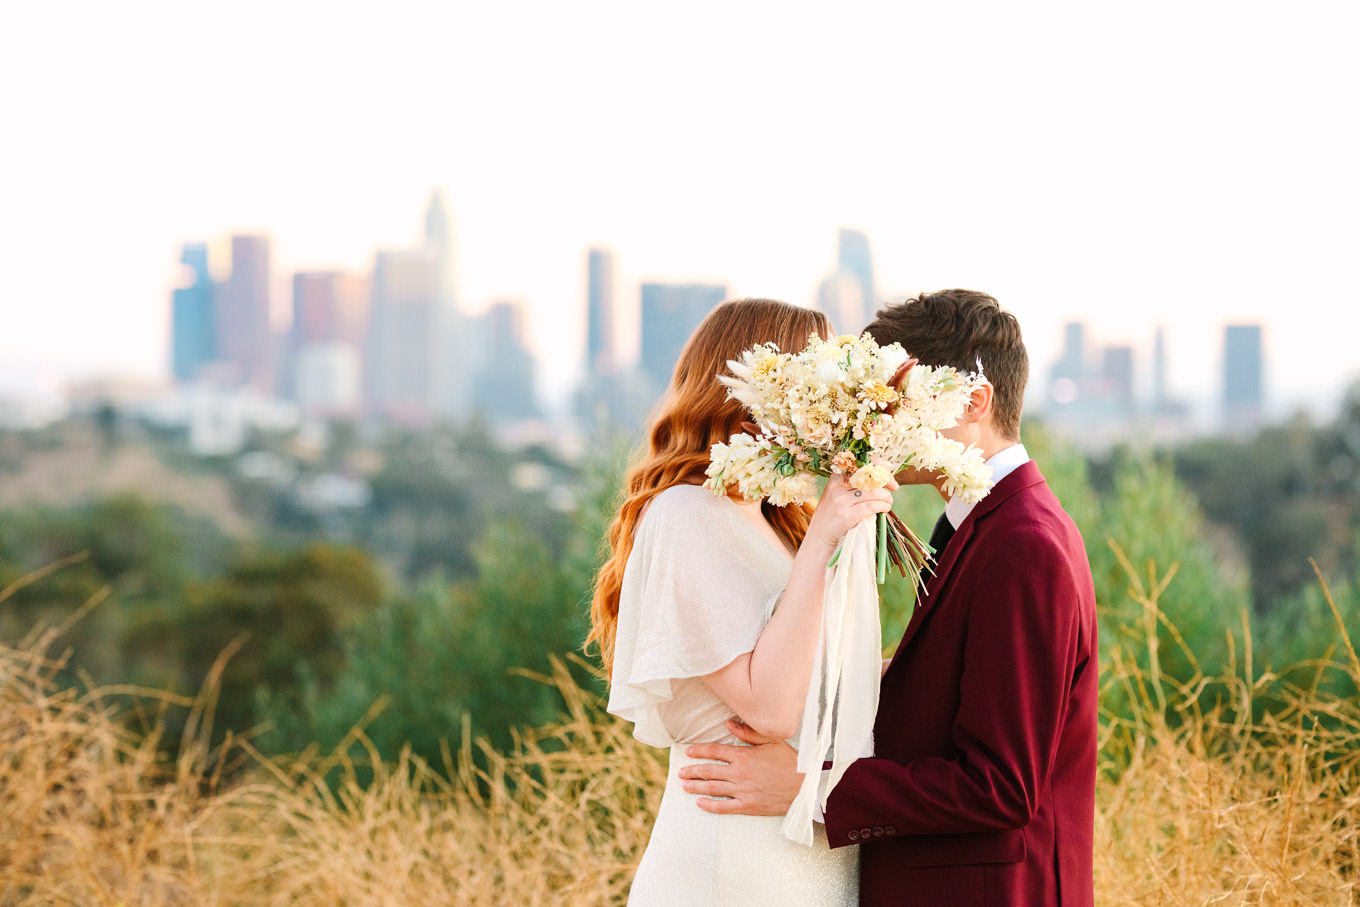 Couple with boho dried bouquet in front of LA skyline | Los Angeles Elysian Park Elopement | Colorful and elevated wedding photography for fun-loving couples in Southern California | #LosAngelesElopement #elopement #LAarboretum #LAskyline #elopementphotos   Source: Mary Costa Photography | Los Angeles